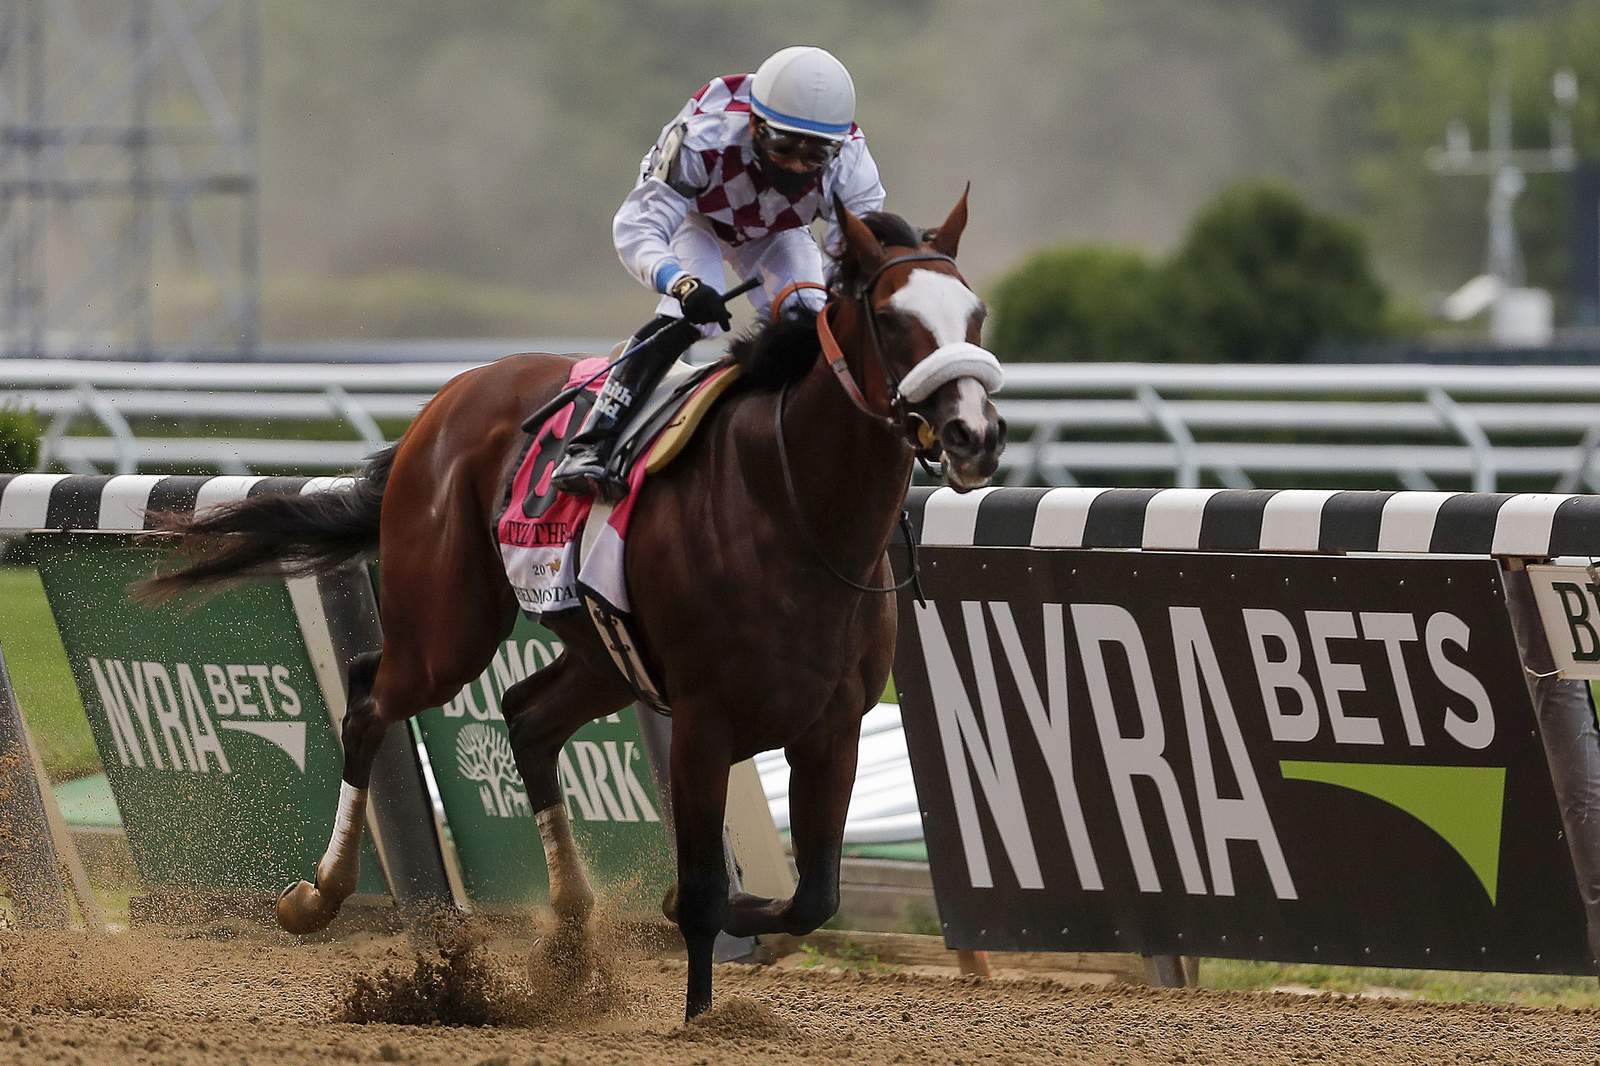 NY-bred Tiz the Law wins barren Belmont Stakes